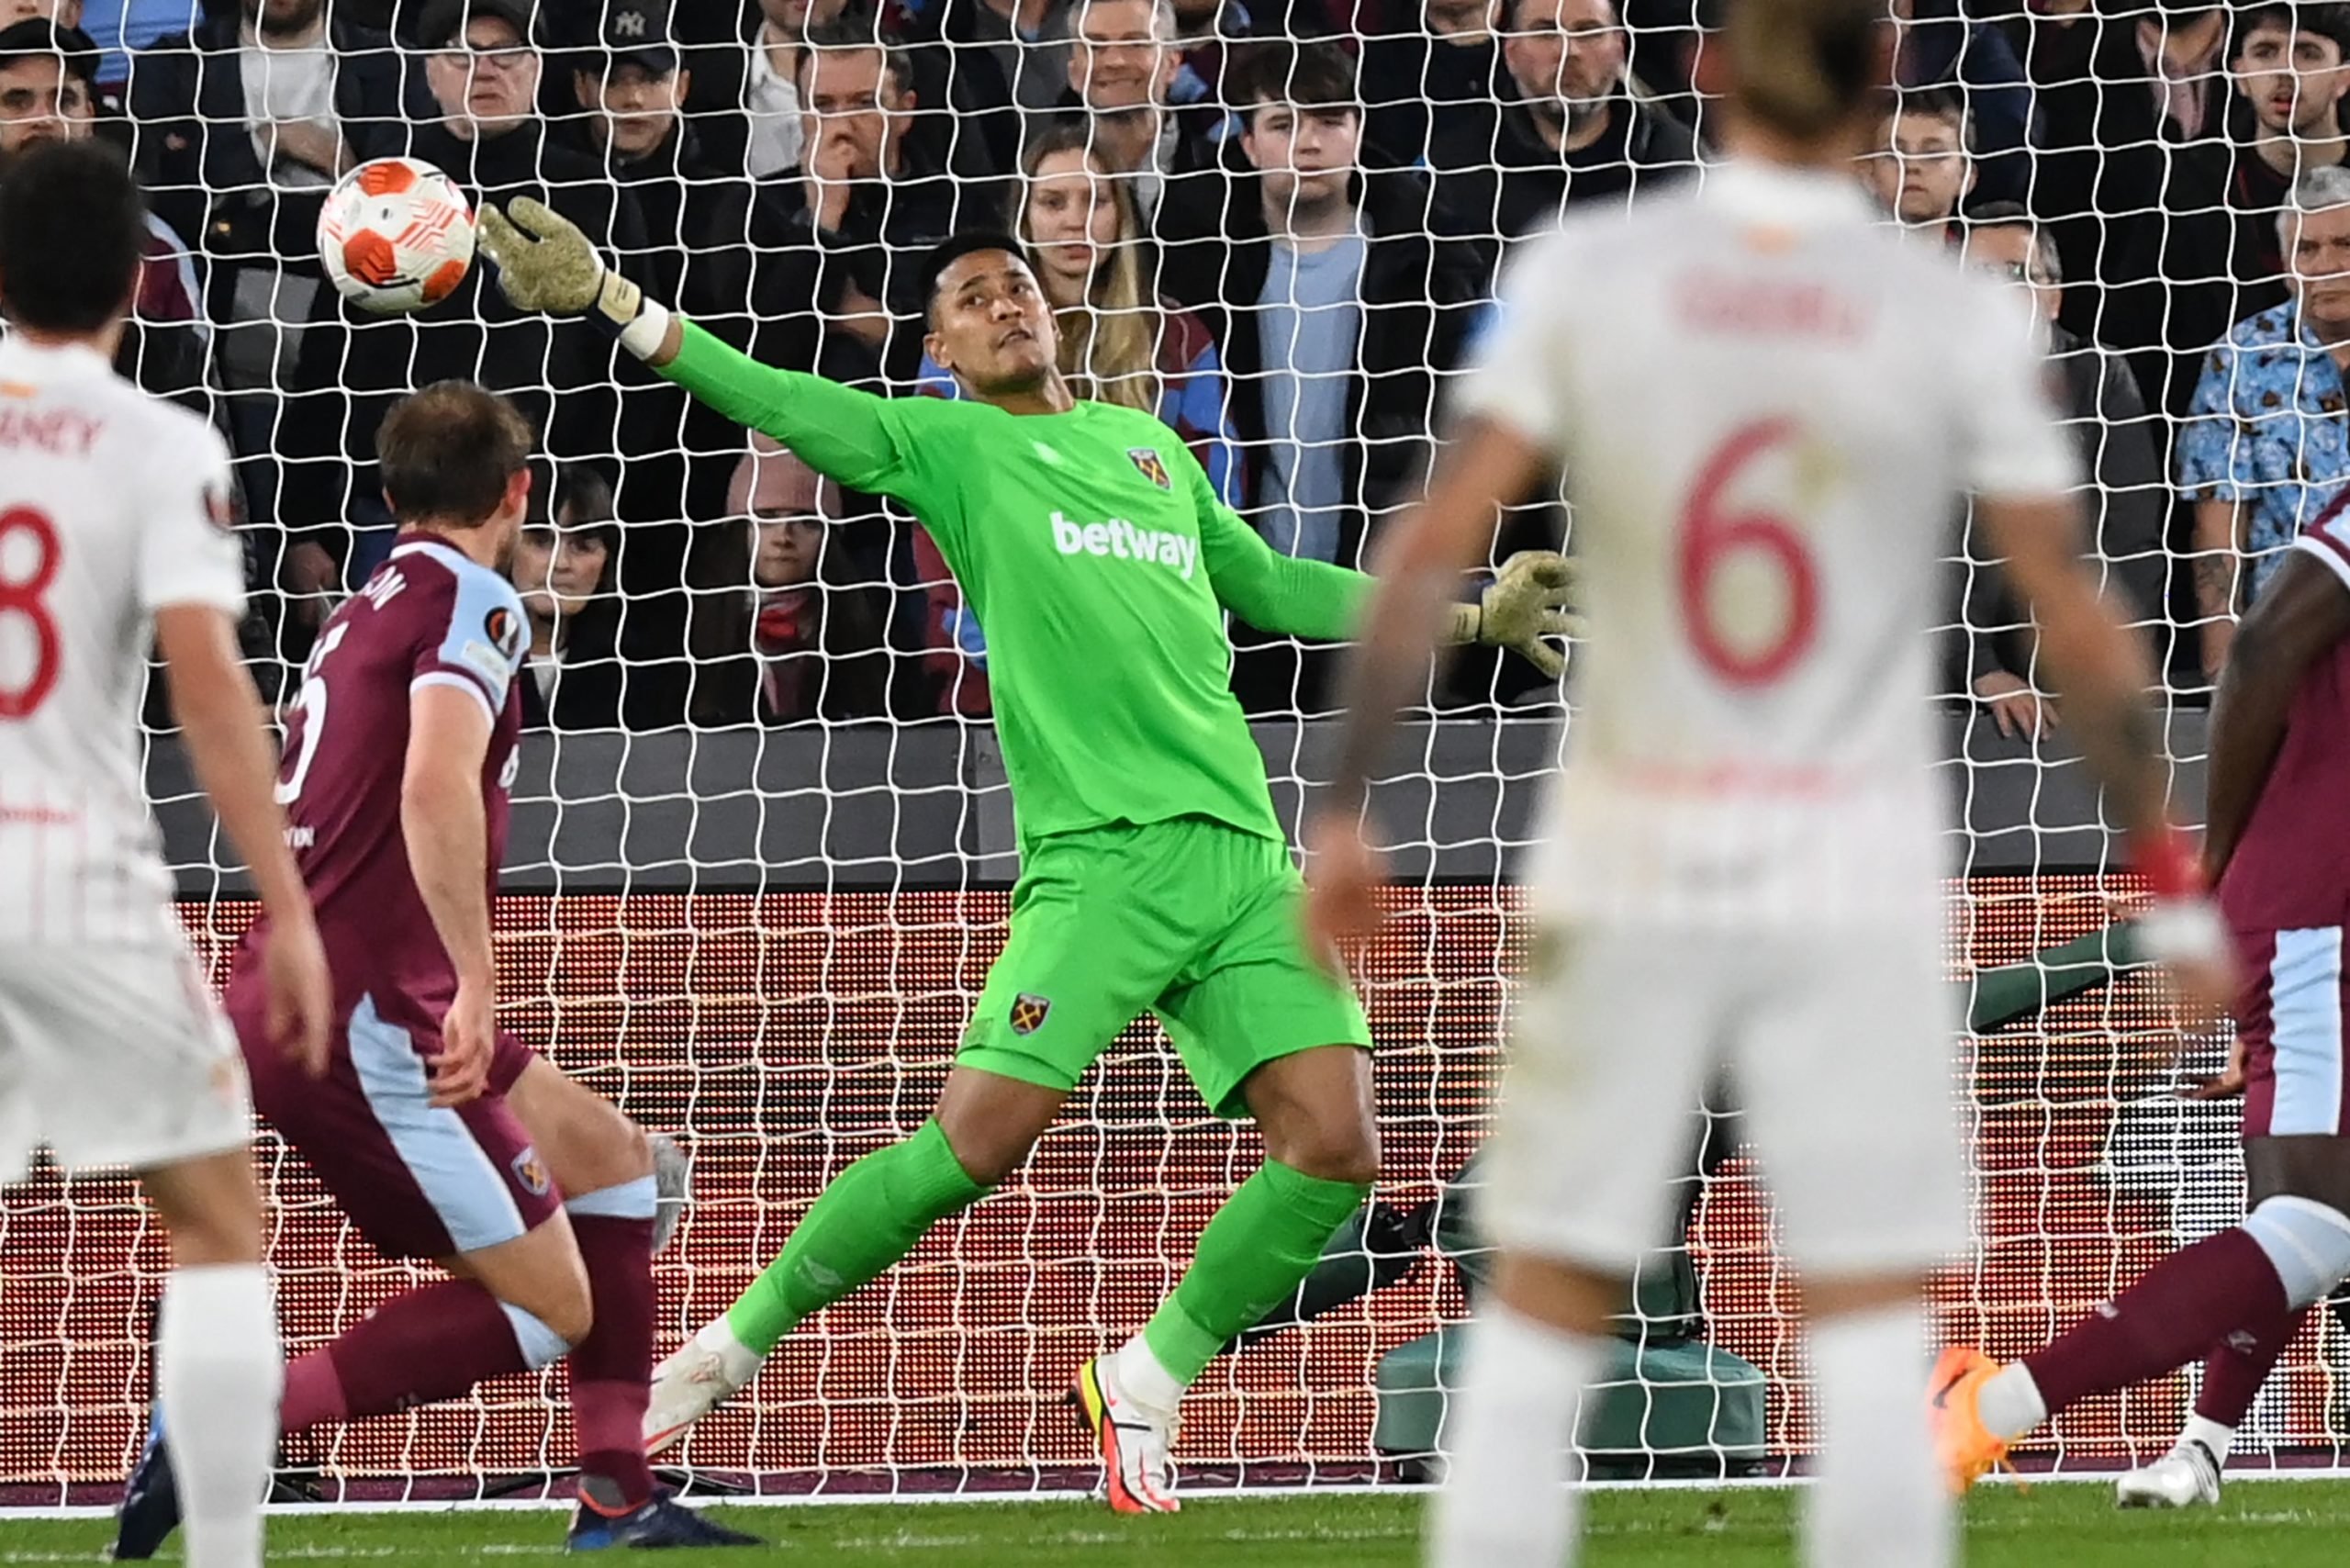 West Ham United goalkeeper Alphonse Areola makes a wonder save during our UEFA Europa League clash with Sevilla at The London Stadium